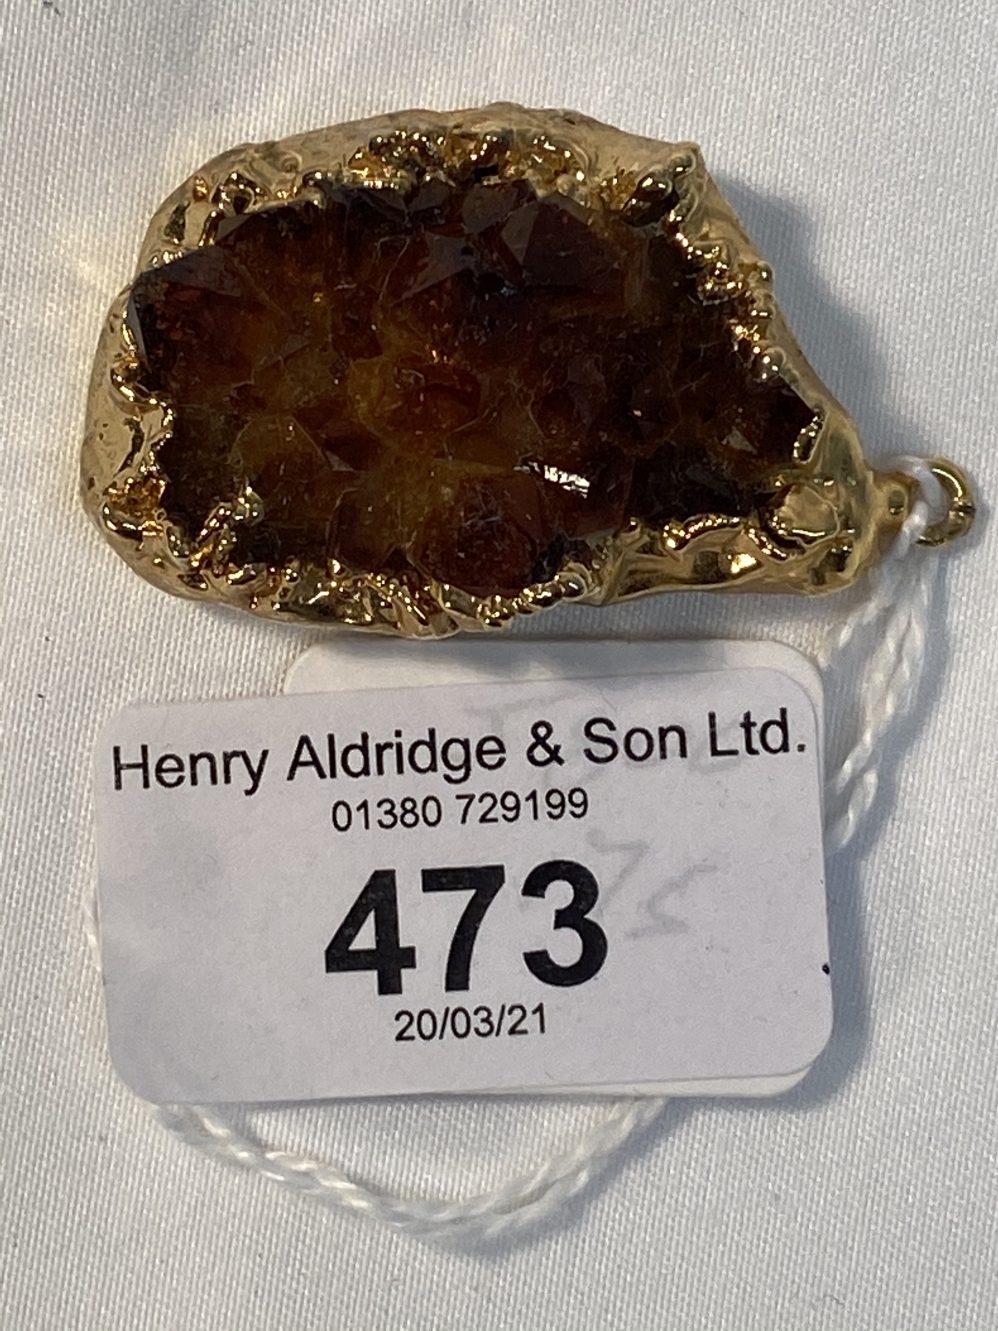 Jewellery: Yellow metal pendant set with avertrine crystal, tests as 14ct gold. Weight 24.8g.